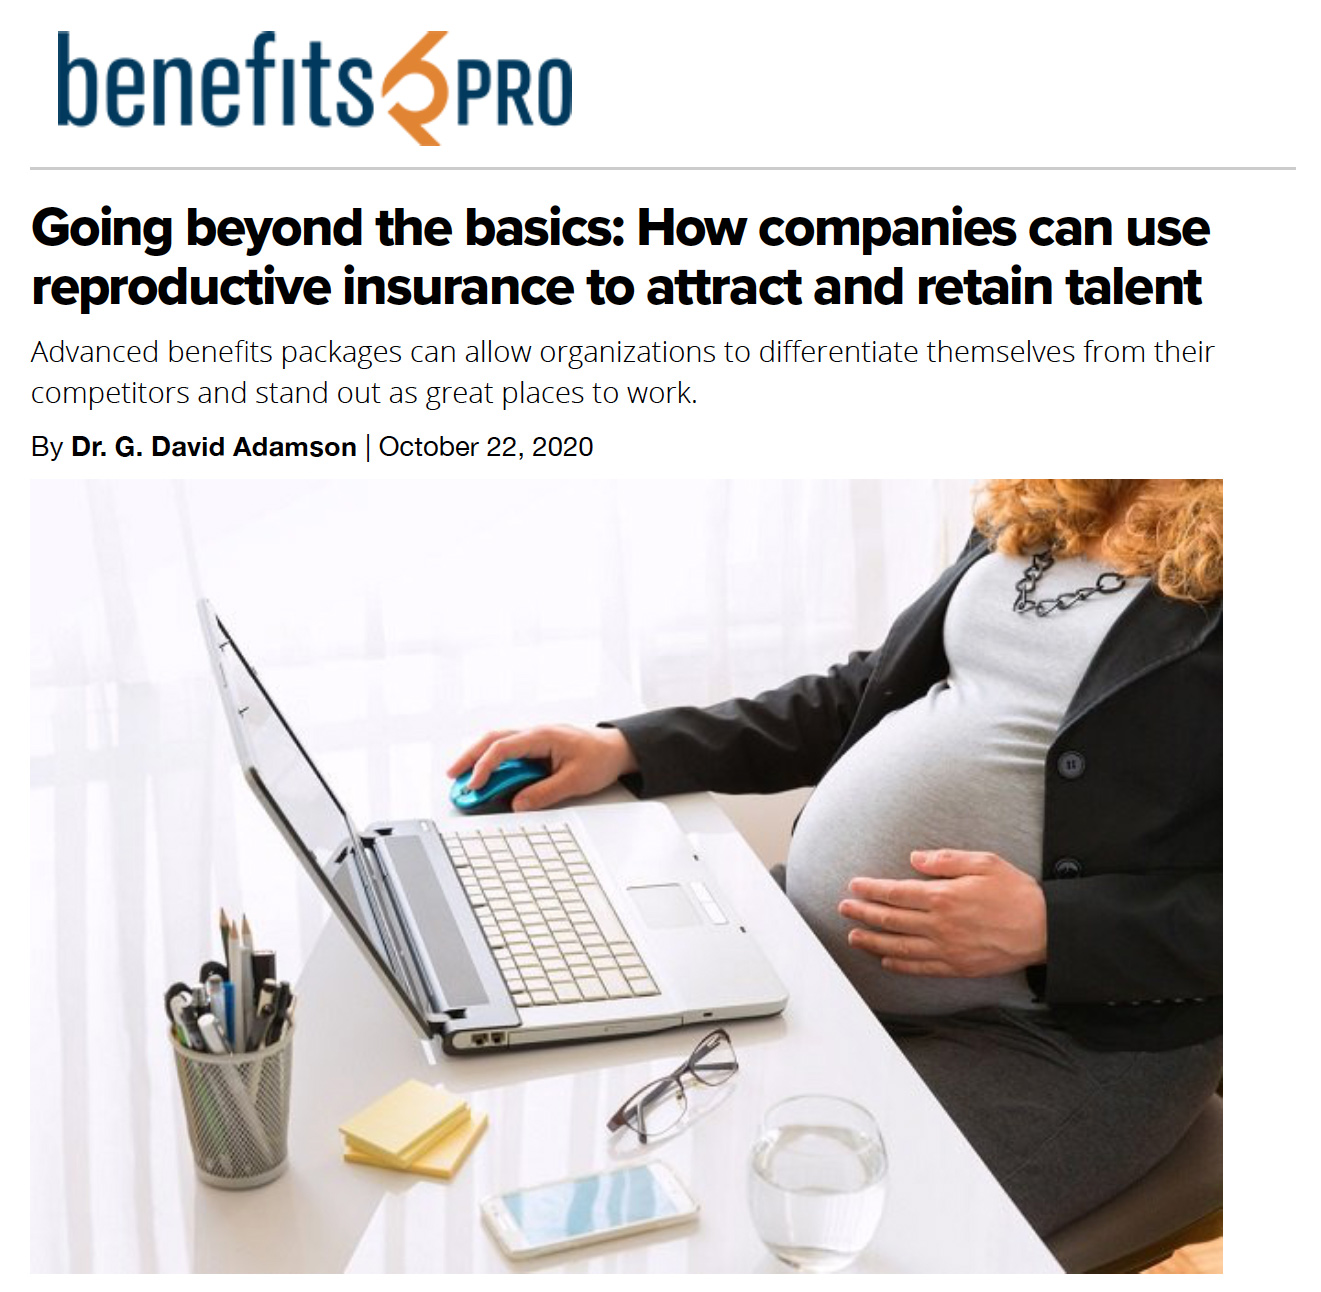 Going beyond the basics: How companies can use reproductive insurance to attract and retain talent